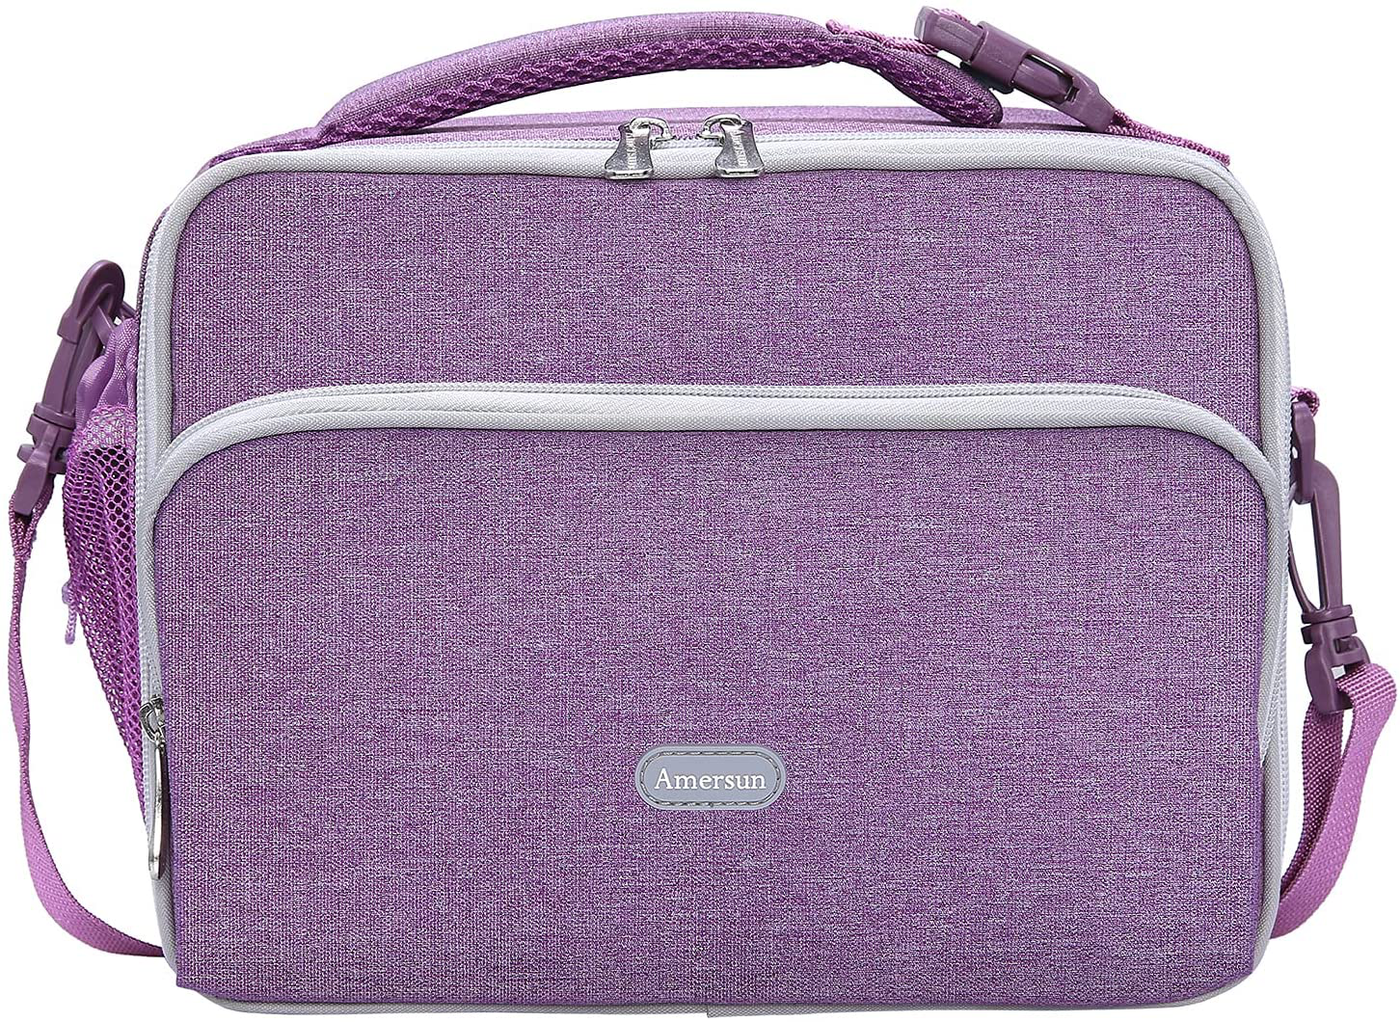 Amersun Lunch Bag for Kids - Padded Durable Insulated Lunch Box with Adjustable Shulder Strap & 2 Pockets for Girls Toddler School,Thermal Freezable Lunch Cooler Keep Food Warm Cold Fresh,Purple